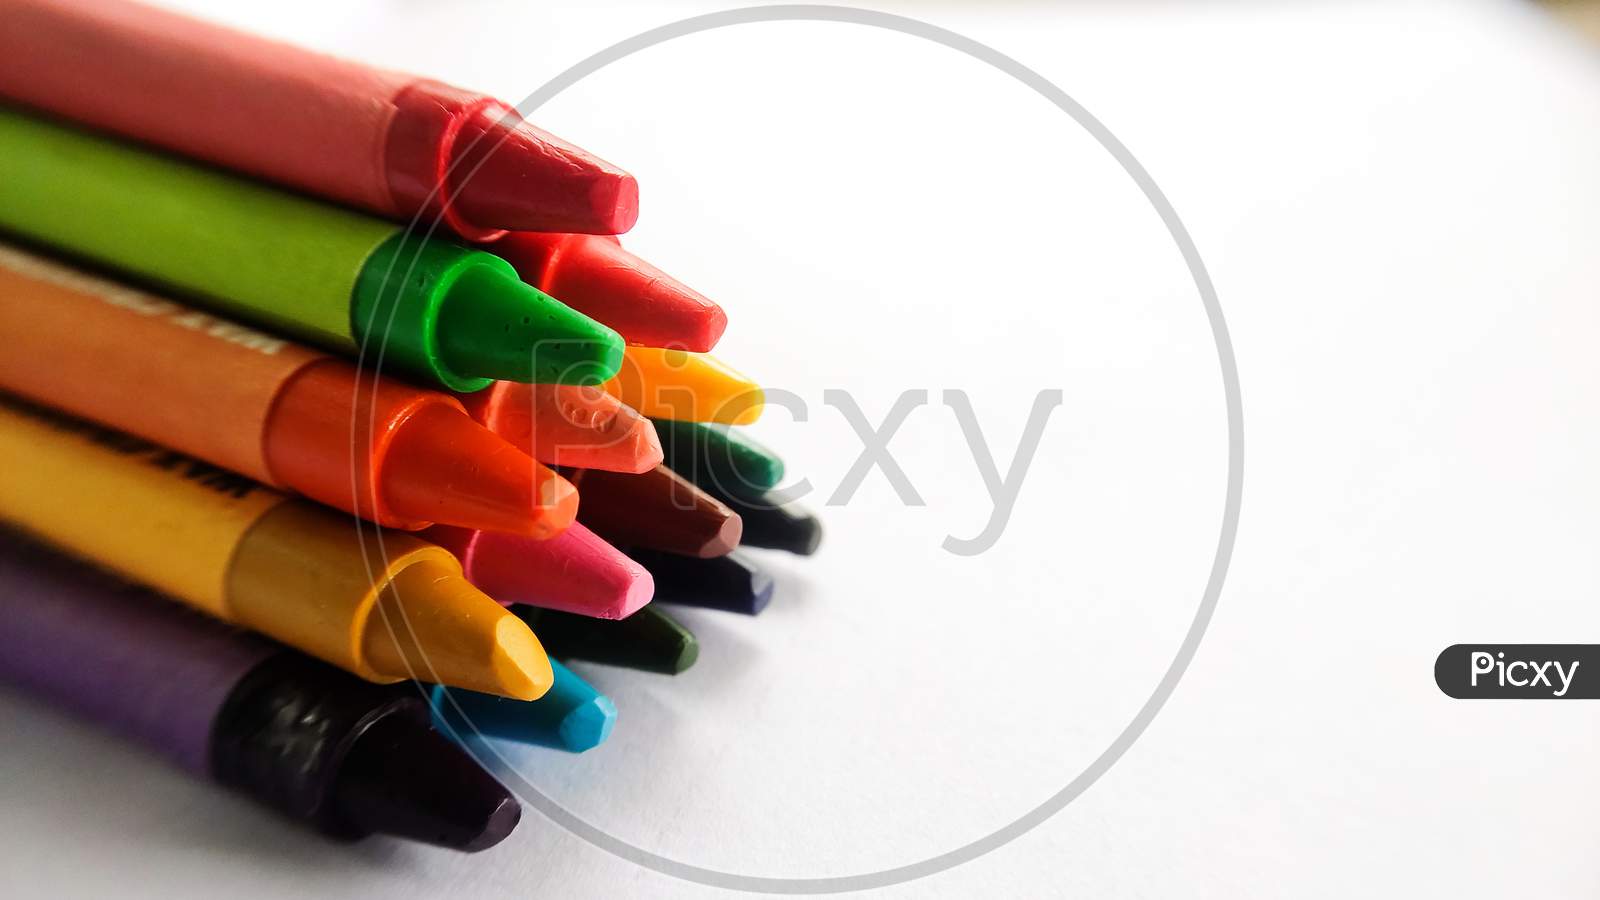 Crayons arranged in a pyramid shape